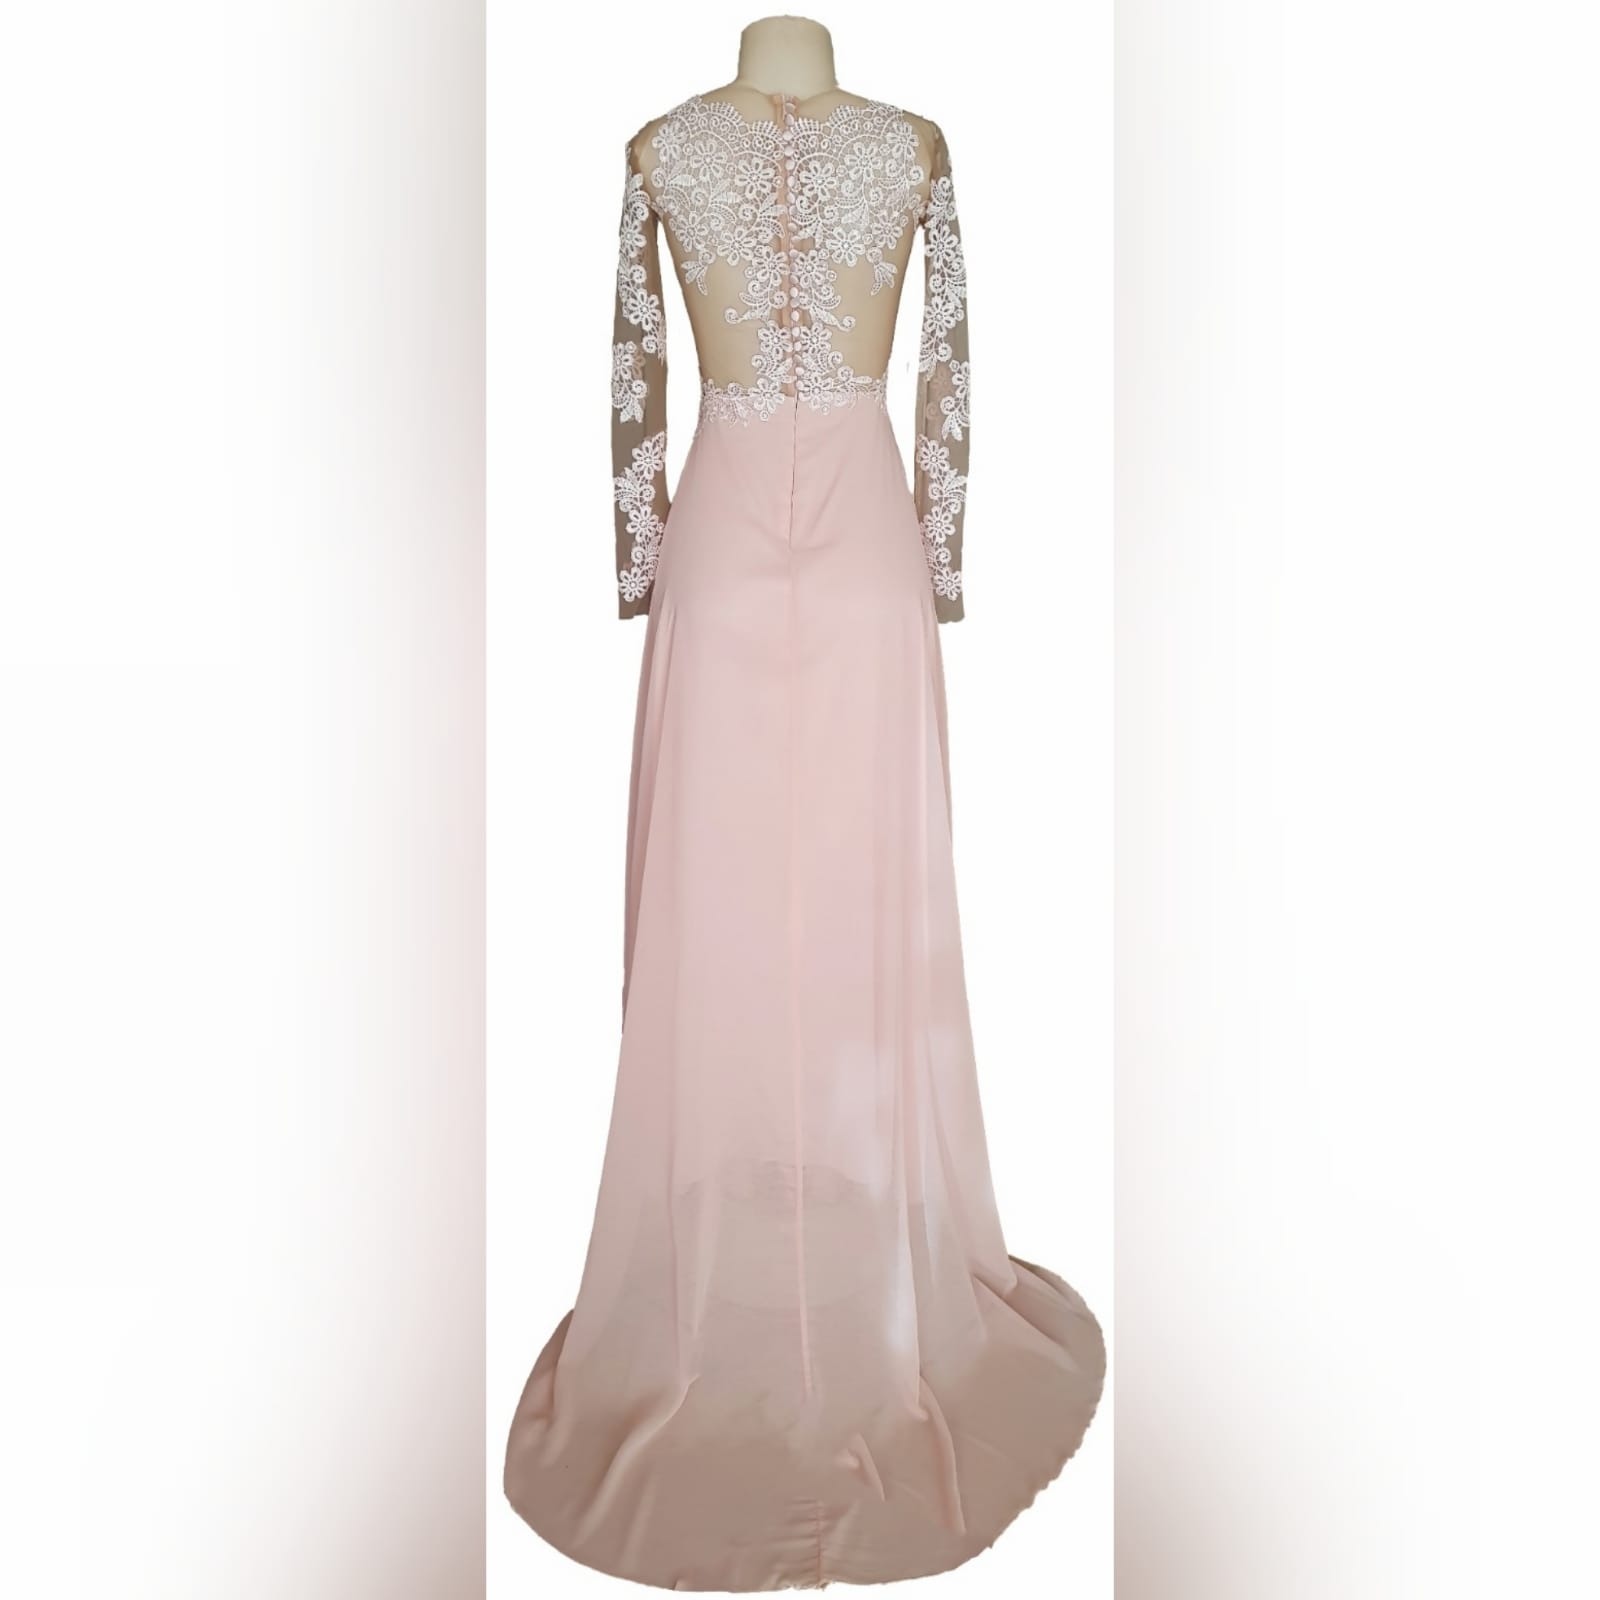 Gorgeous ceremony dress 4 <blockquote>each time a woman stands up for herself, she stands up for all women. - maya angelou</blockquote> this gorgeous ceremony dress was created especially for my client as her prom dress. A pale pink dress made with soft flowy chiffon with a little train and a slit. With a translucent bodice, and sleeves detailed with lace. Back finished with satin buttons for that extra detail.